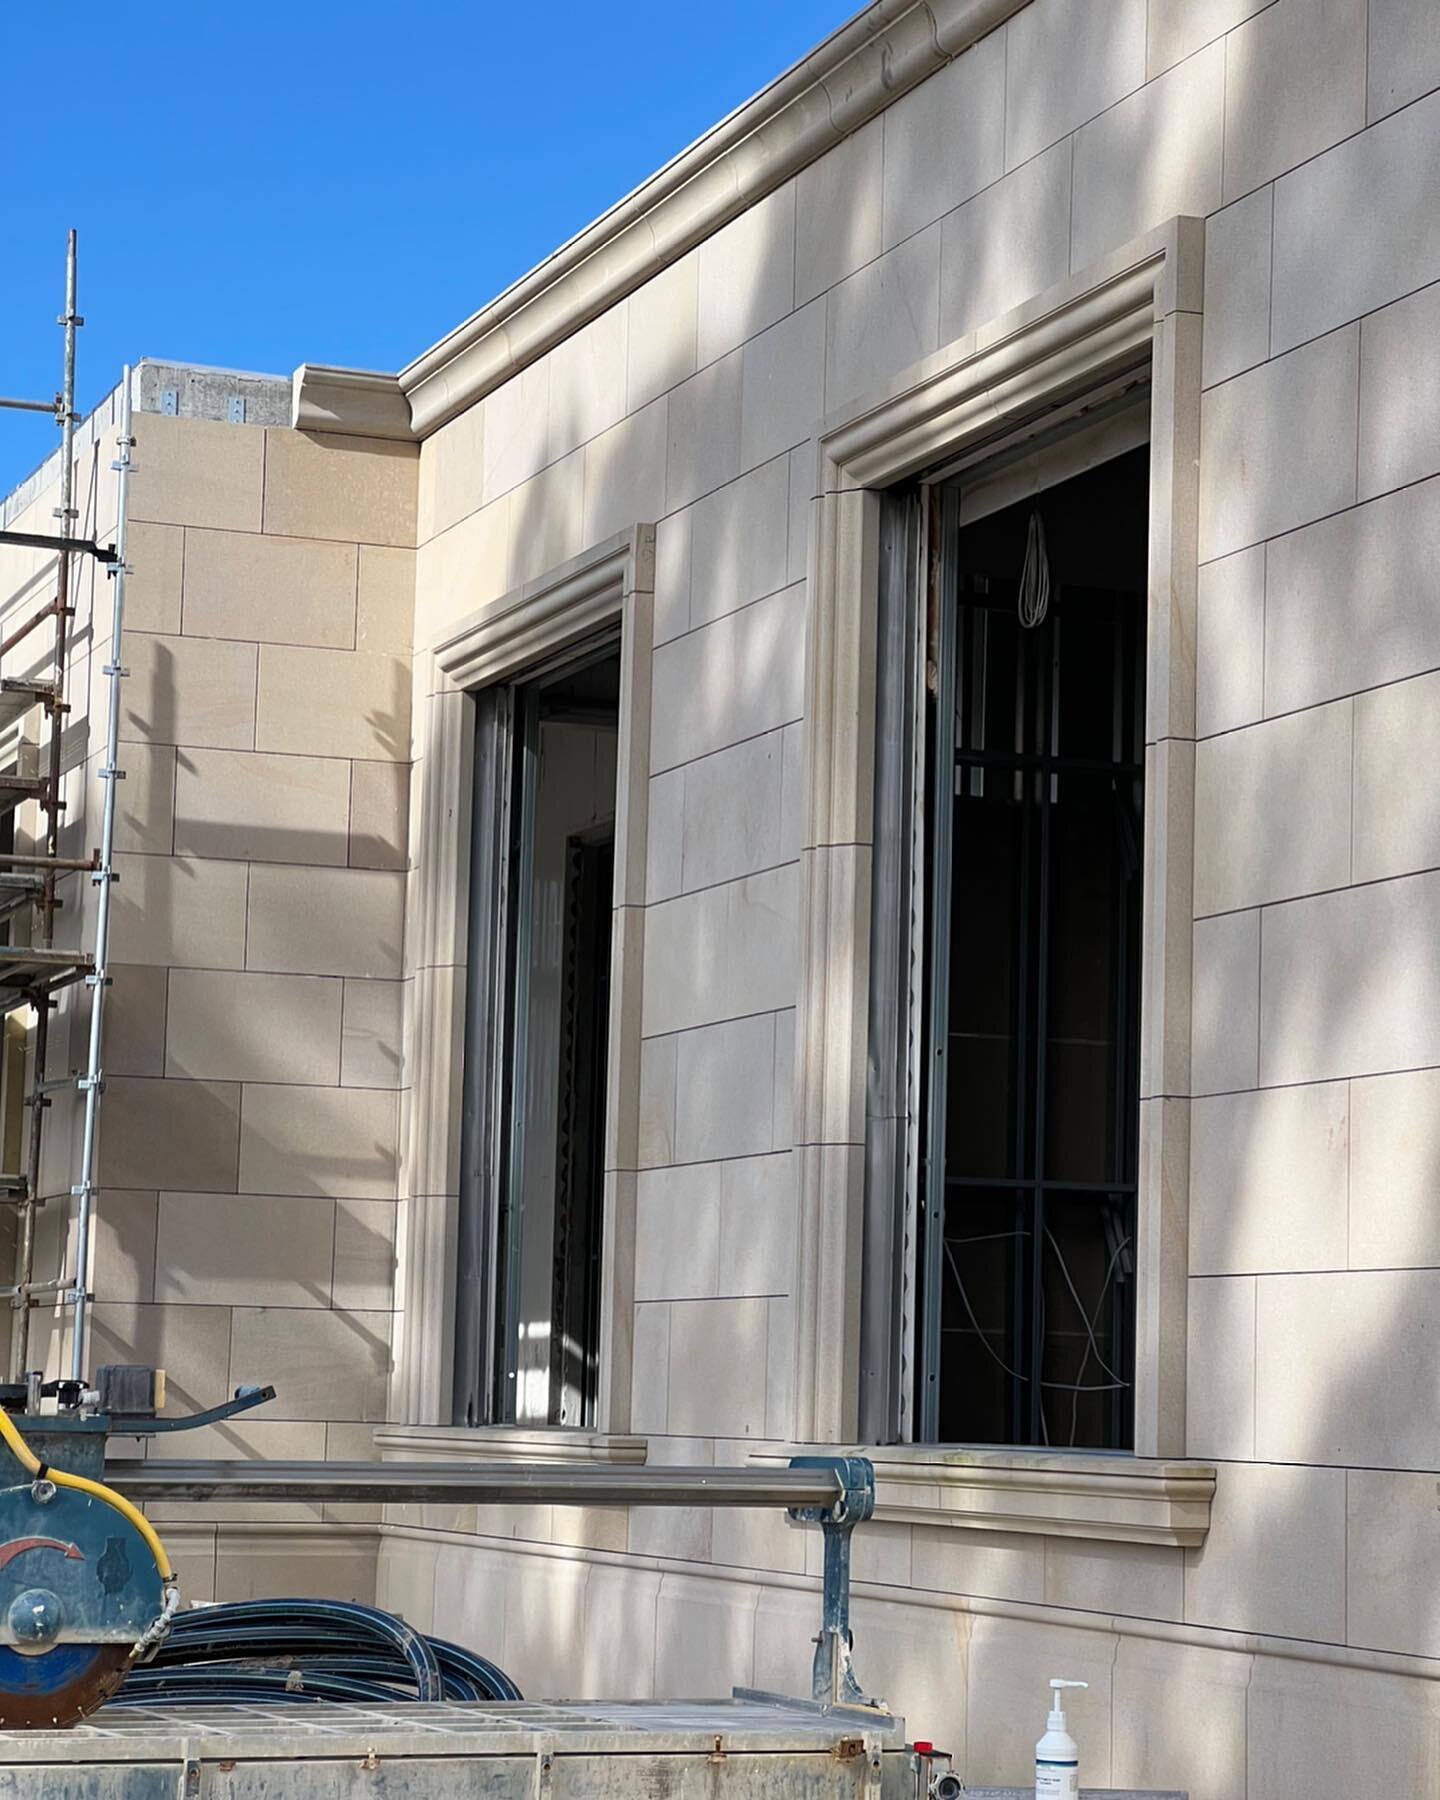 We are often engaged on highly complex luxury projects due to our teams expertise on classical architecture and historic materials. Check out this progress shot of the facade of a local residential home 👌